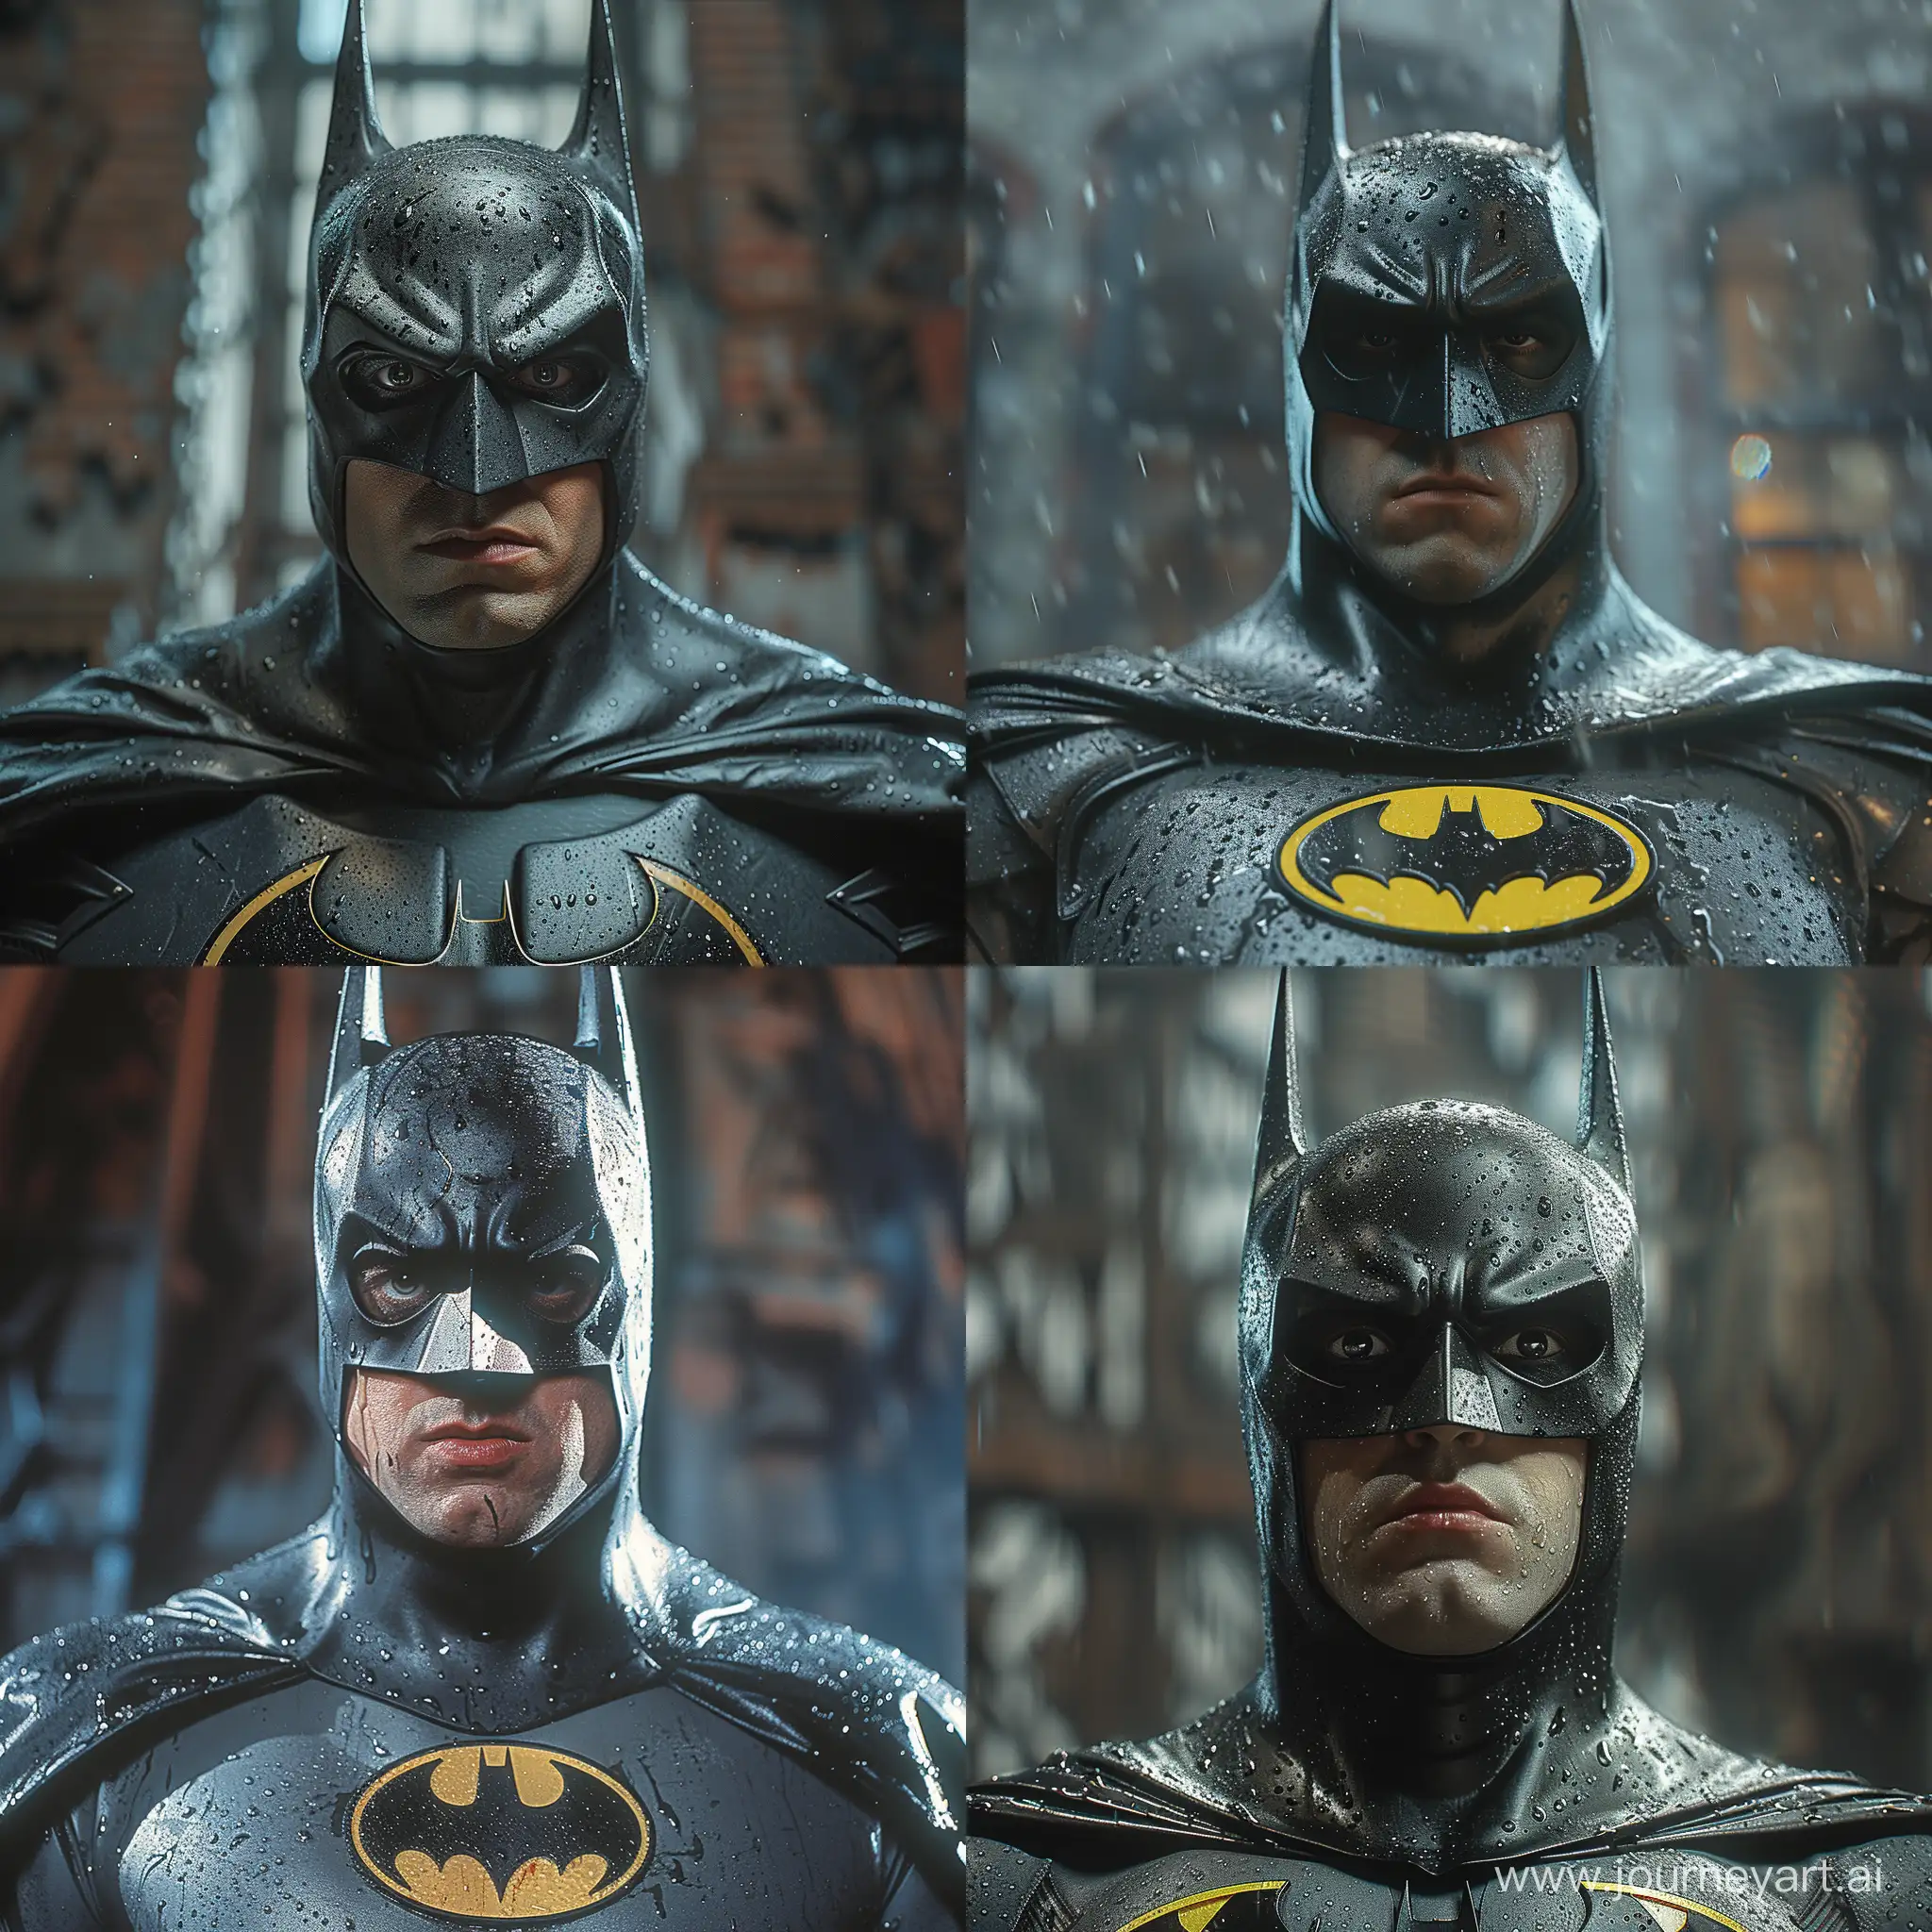 a close-up of realistic batman 1989 costume, the opening for the eyes and lower part of the face. The character's expression is serious or stern, consistent with the typical portrayal of Batman as a determined and intense superhero. The costume appears to be made of a material that mimics the texture of leather, readiness to face danger. The lighting is dim, suggesting a dark or nighttime setting, which is characteristic of the Gotham City environment where batman often operates. The background is blurred and not clearly discernible, but it seems to be a gloomy and possibly industrial setting, adding to the overall dark and gritty atmosphere often associated with batman media --stylize 750 --s 750 --v 6